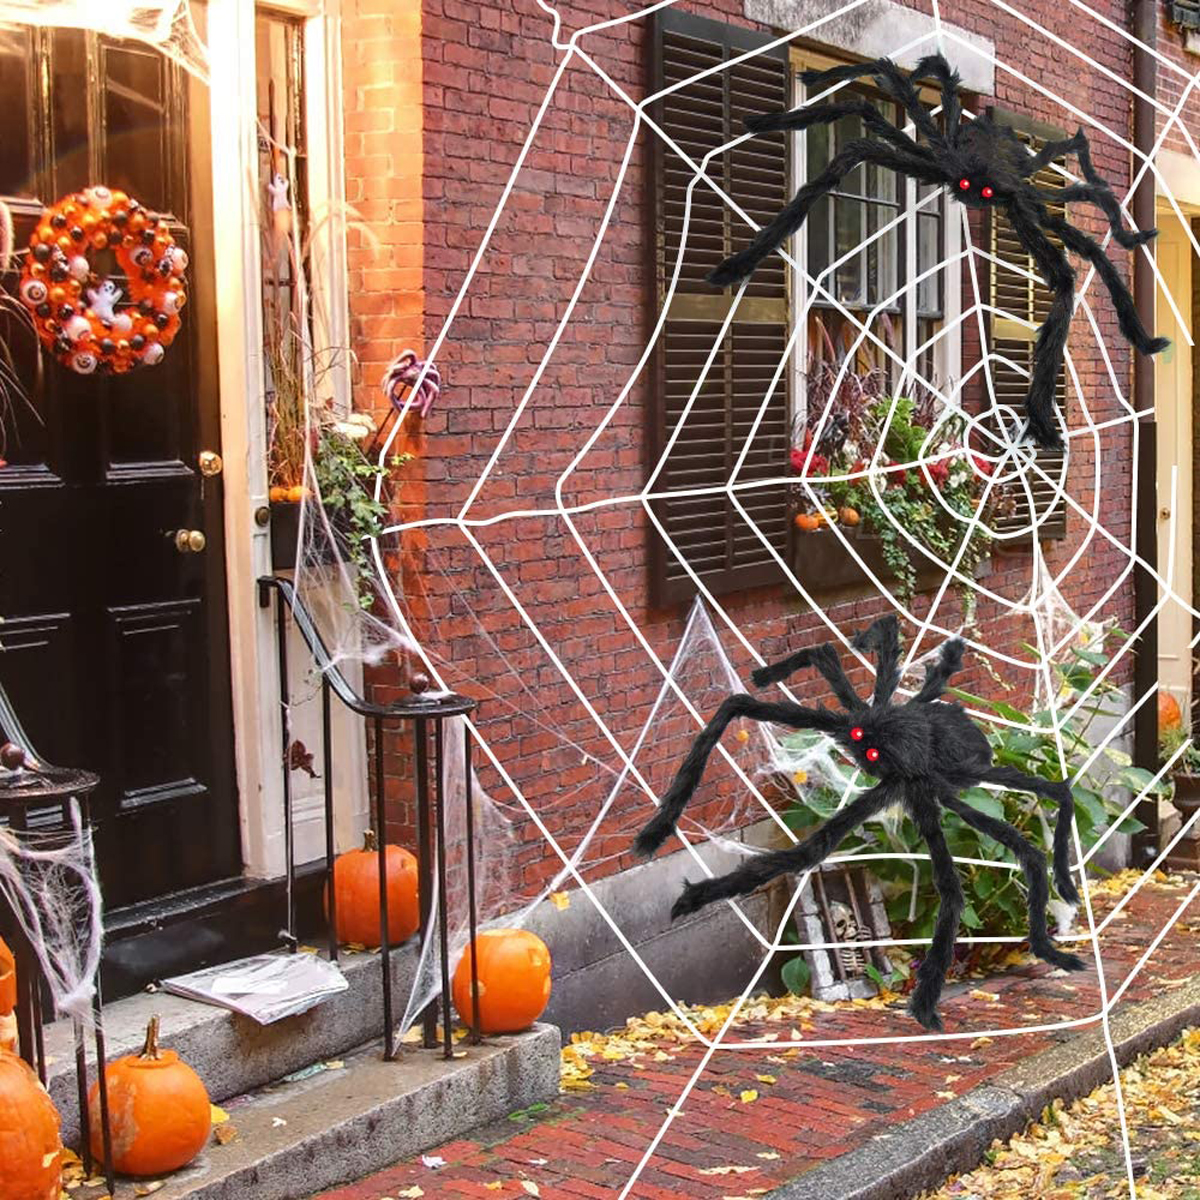 Halloween-LED-Spider-Web-String-Light-Outdoor-Horror-Party-Props-Lamp-Cobweb-Spooky-Decor-1754369-4